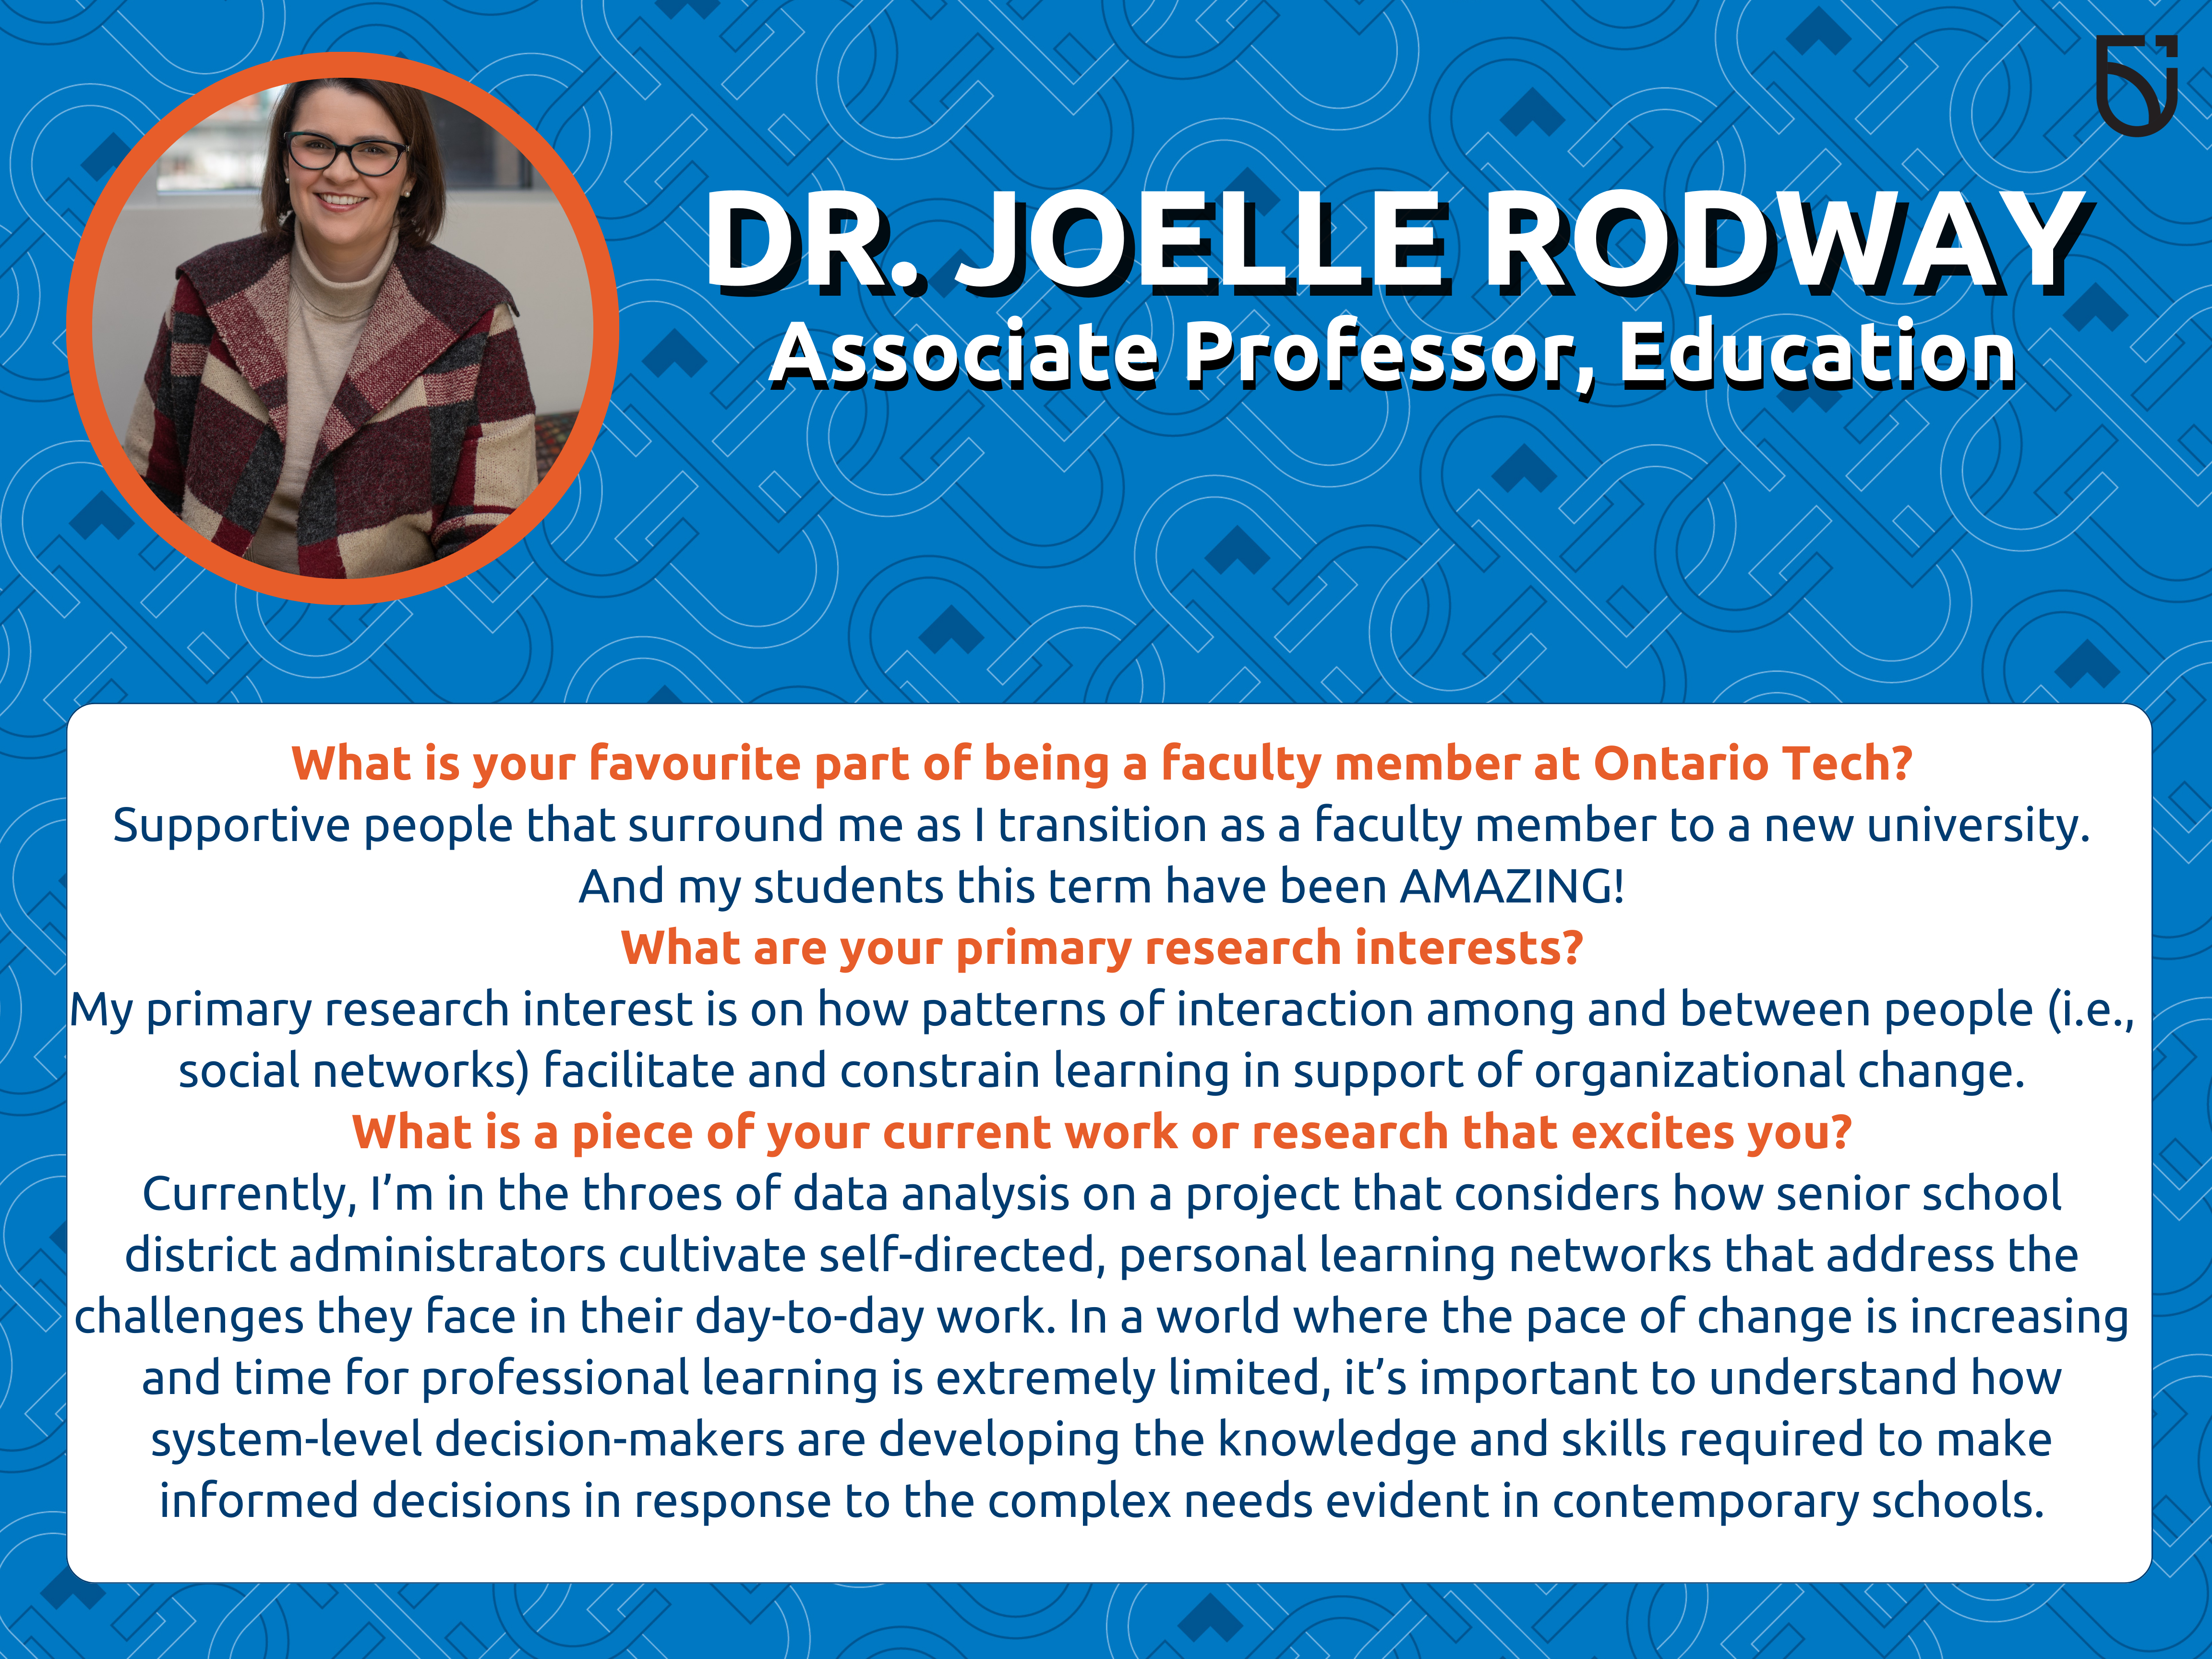 This photo is a Women’s Wednesday feature of Dr. Joelle Rodway, an Associate Professor in the Mitch & Leslie Frazer Faculty of Education.